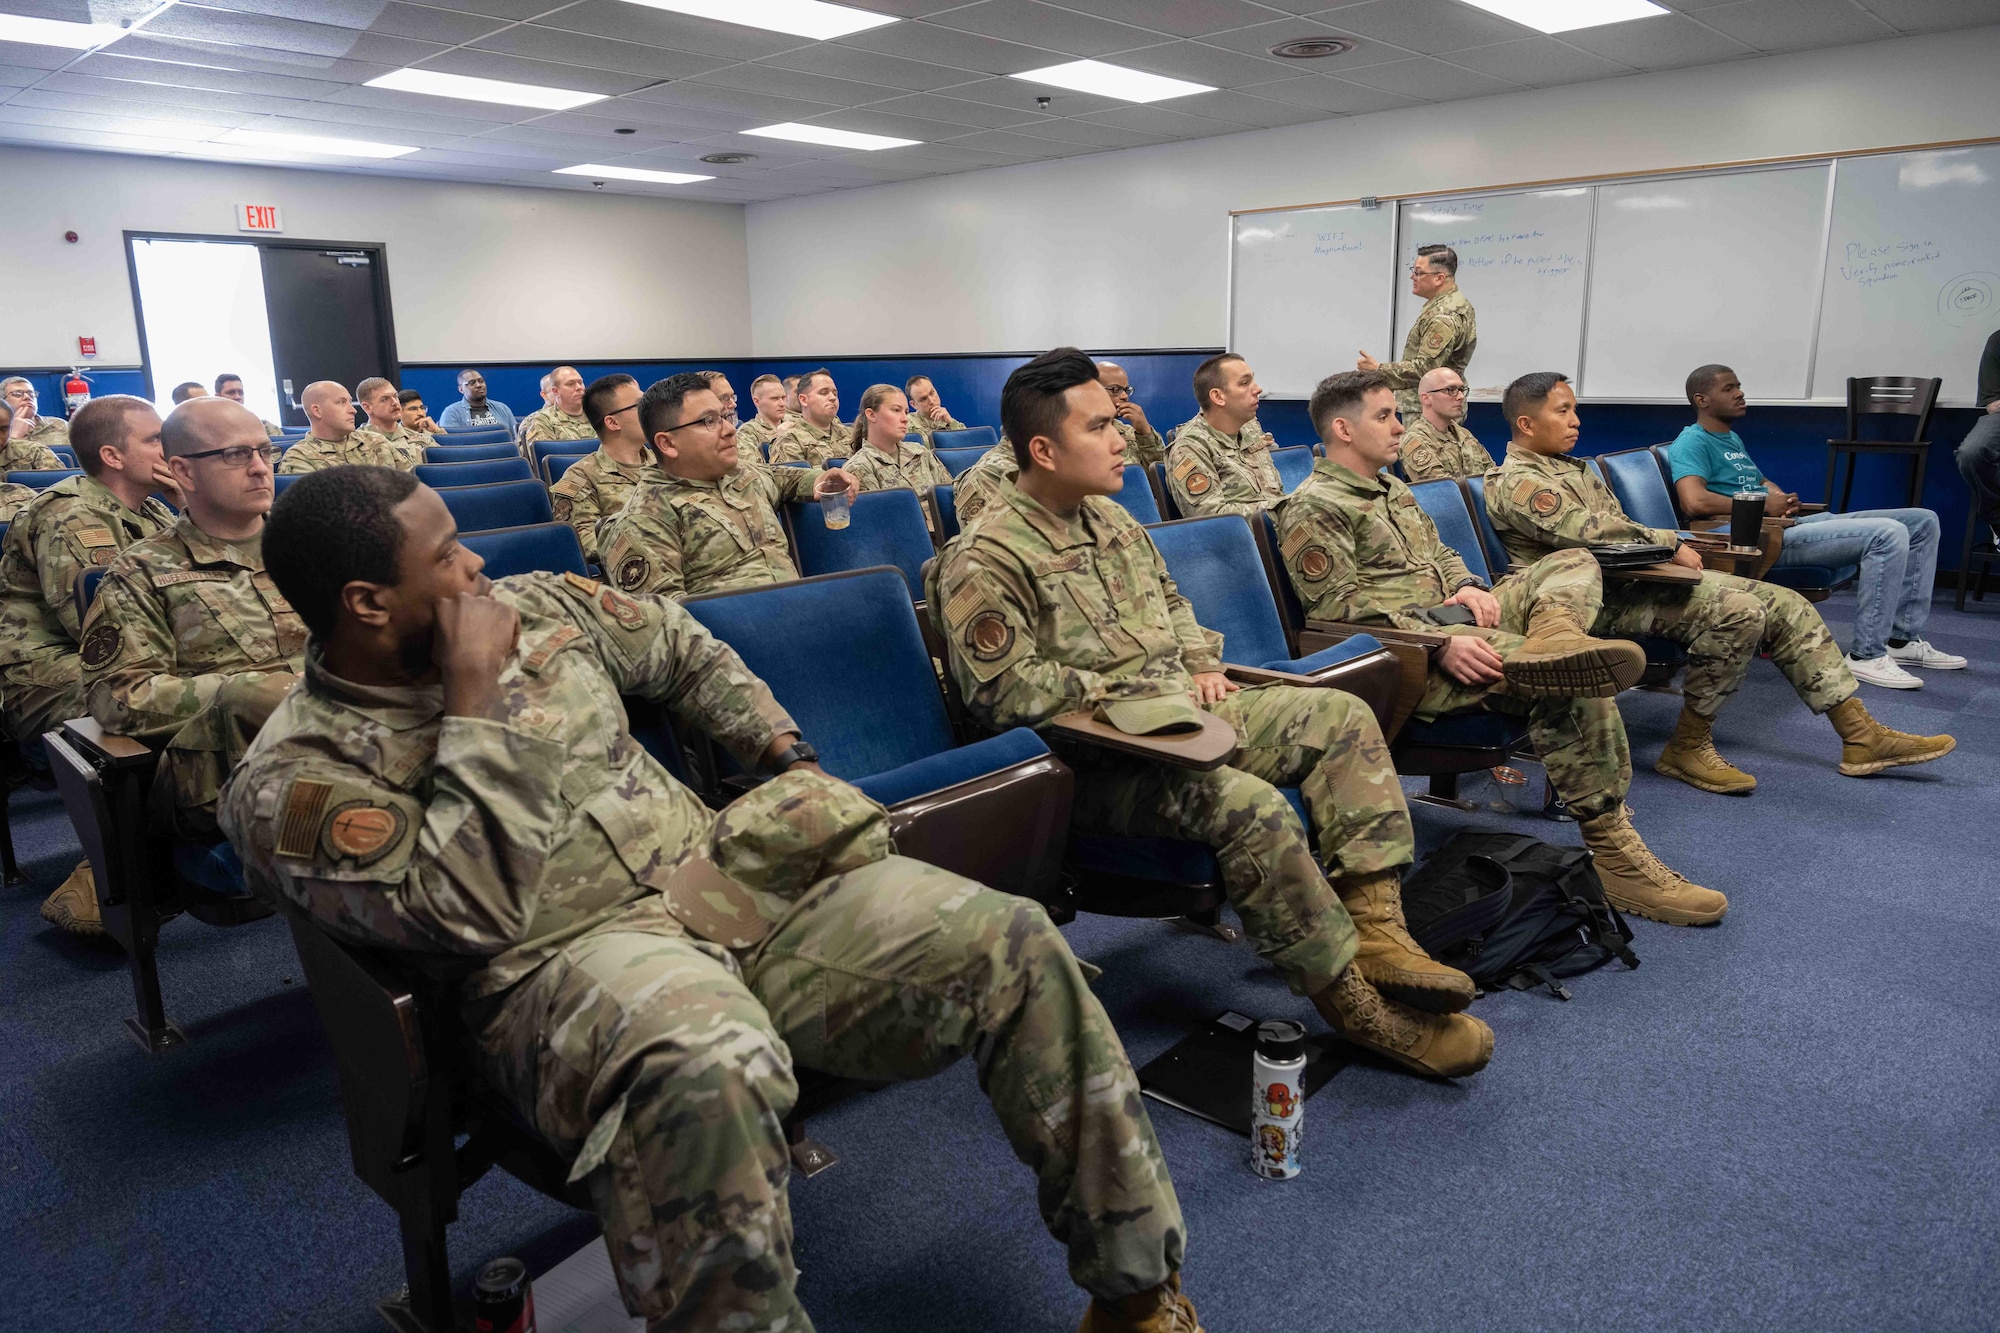 Military members sit in a room during a presentation.